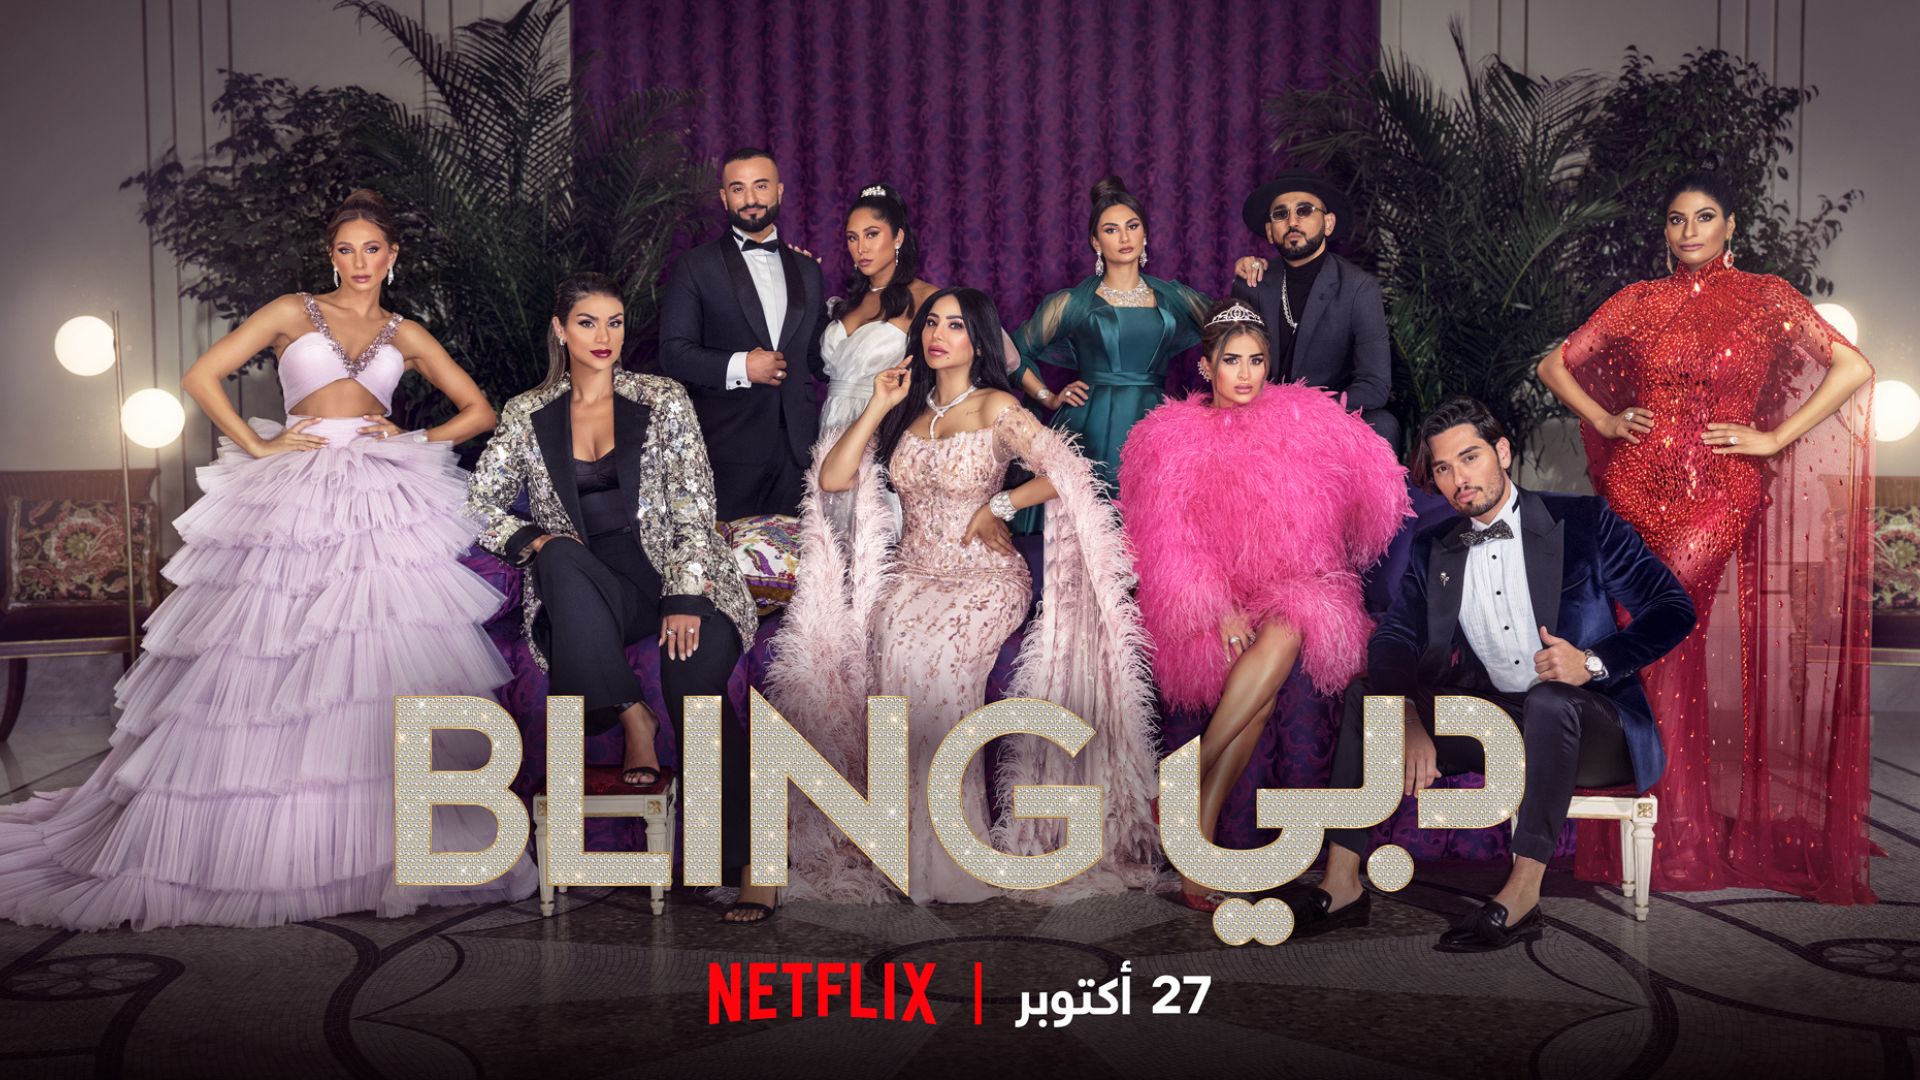 Dubai Bling Season 2: Expected Release Date, Cast And More